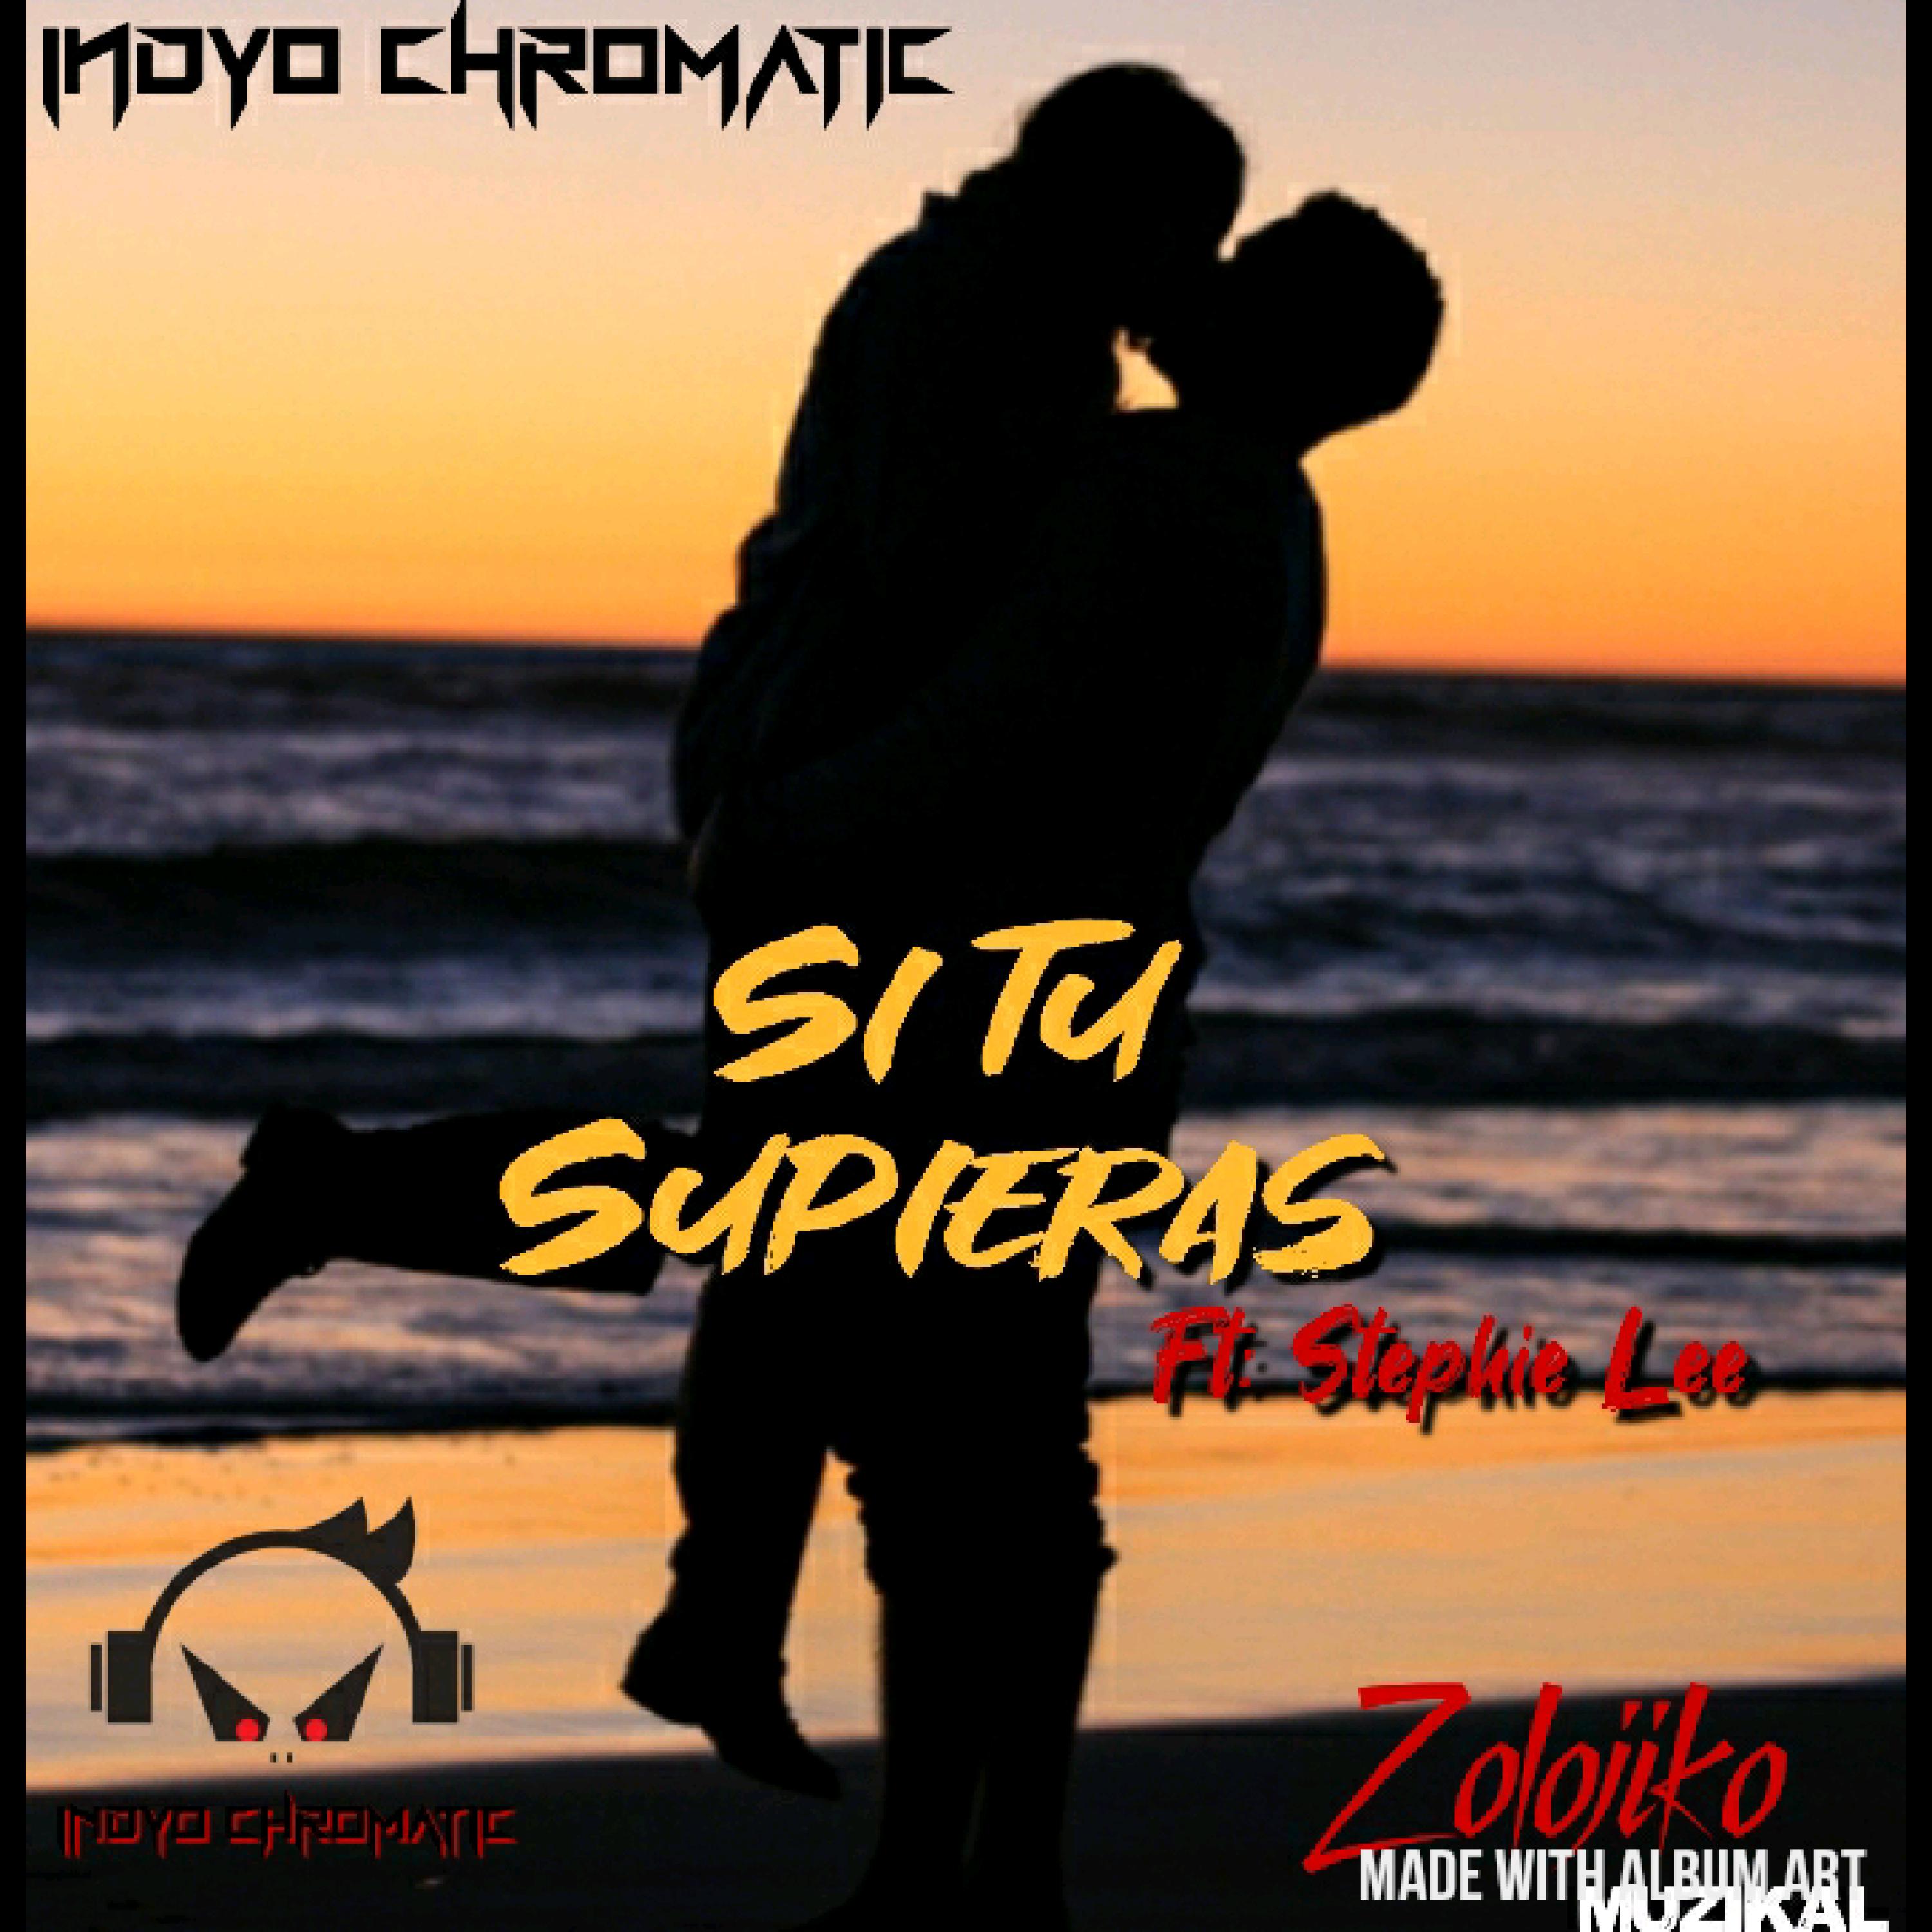 Indyo Chromatic - Si Tu Supieras (feat. Stephy Lee)